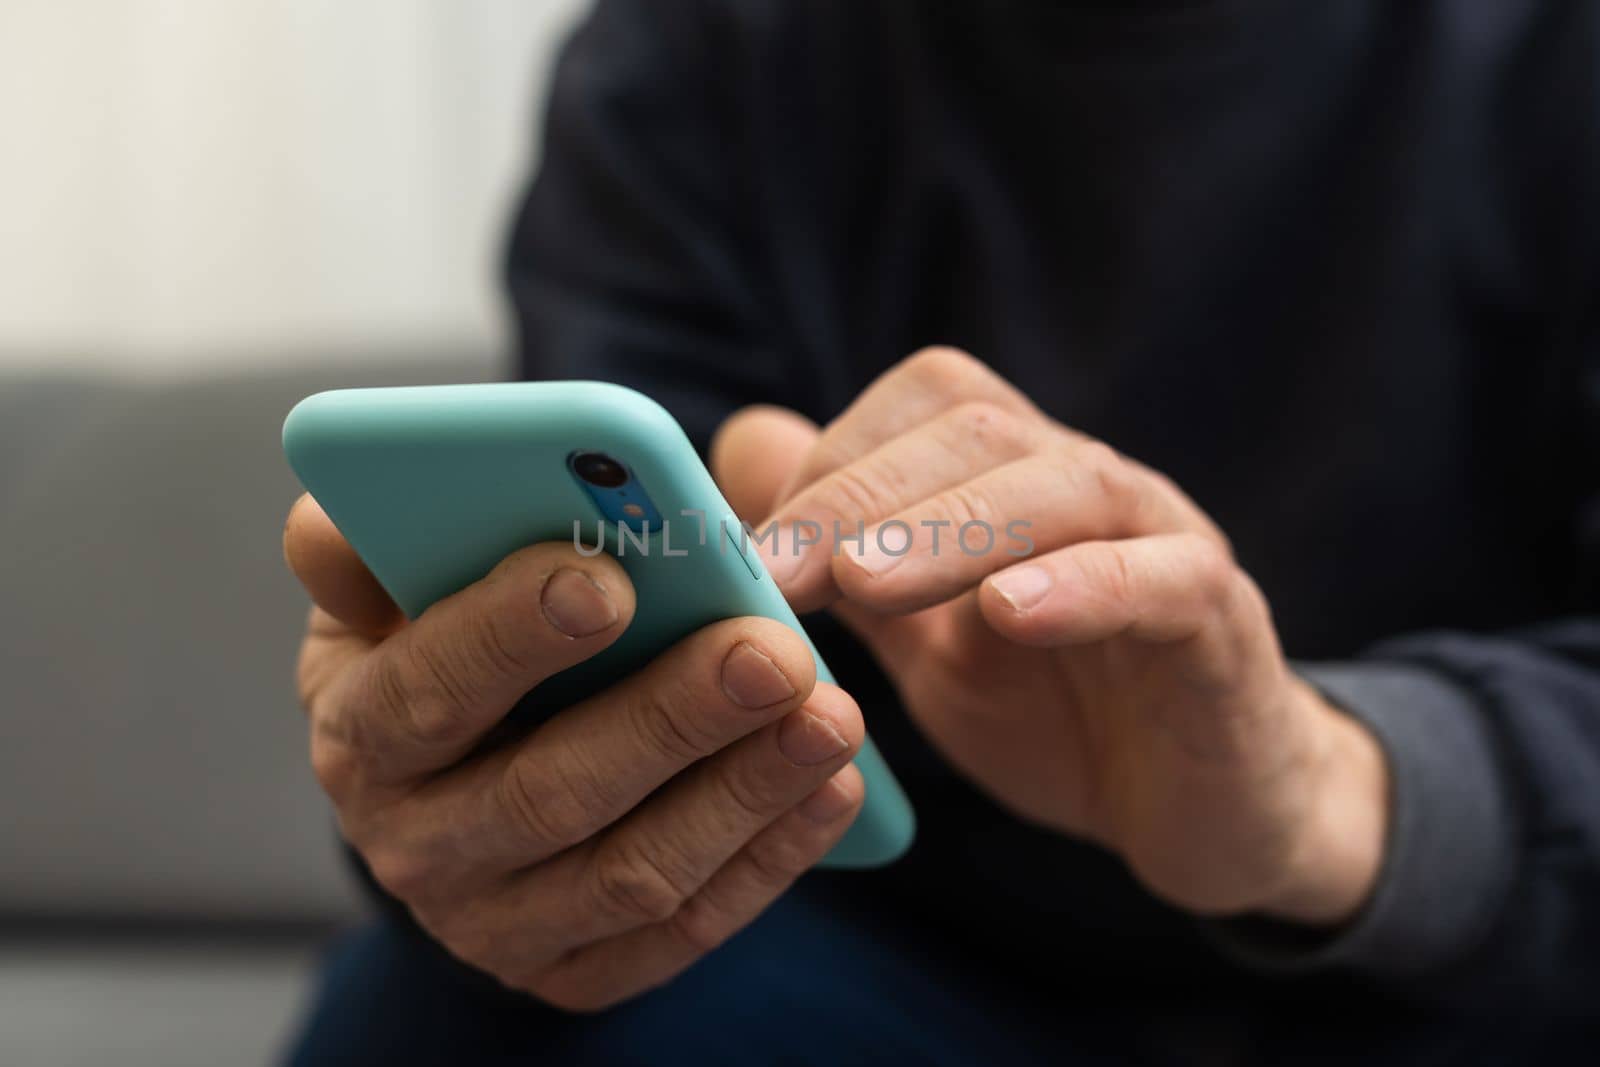 Elderly man using smartphone, mobile phone in male hands close up. Concept of online communication in retirement, sms, social media. by Andelov13